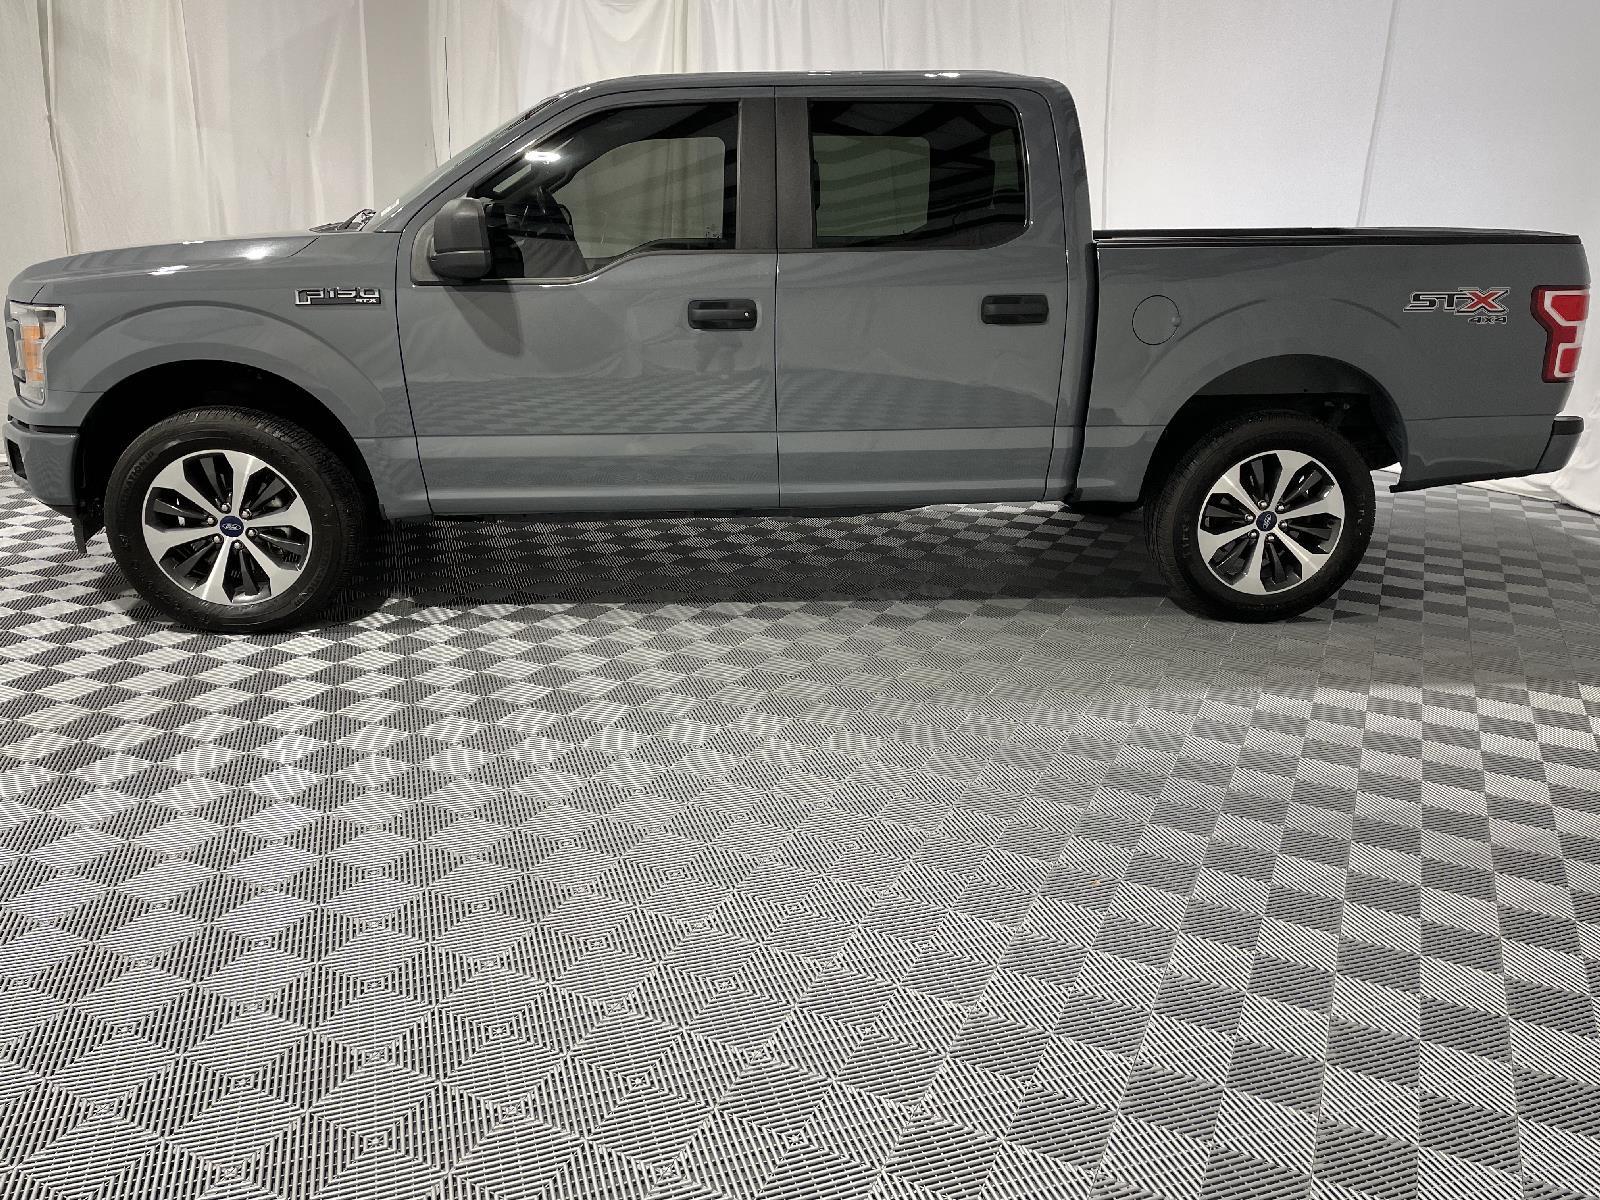 Used 2020 Ford F-150 XL Crew Cab Truck for sale in St Joseph MO